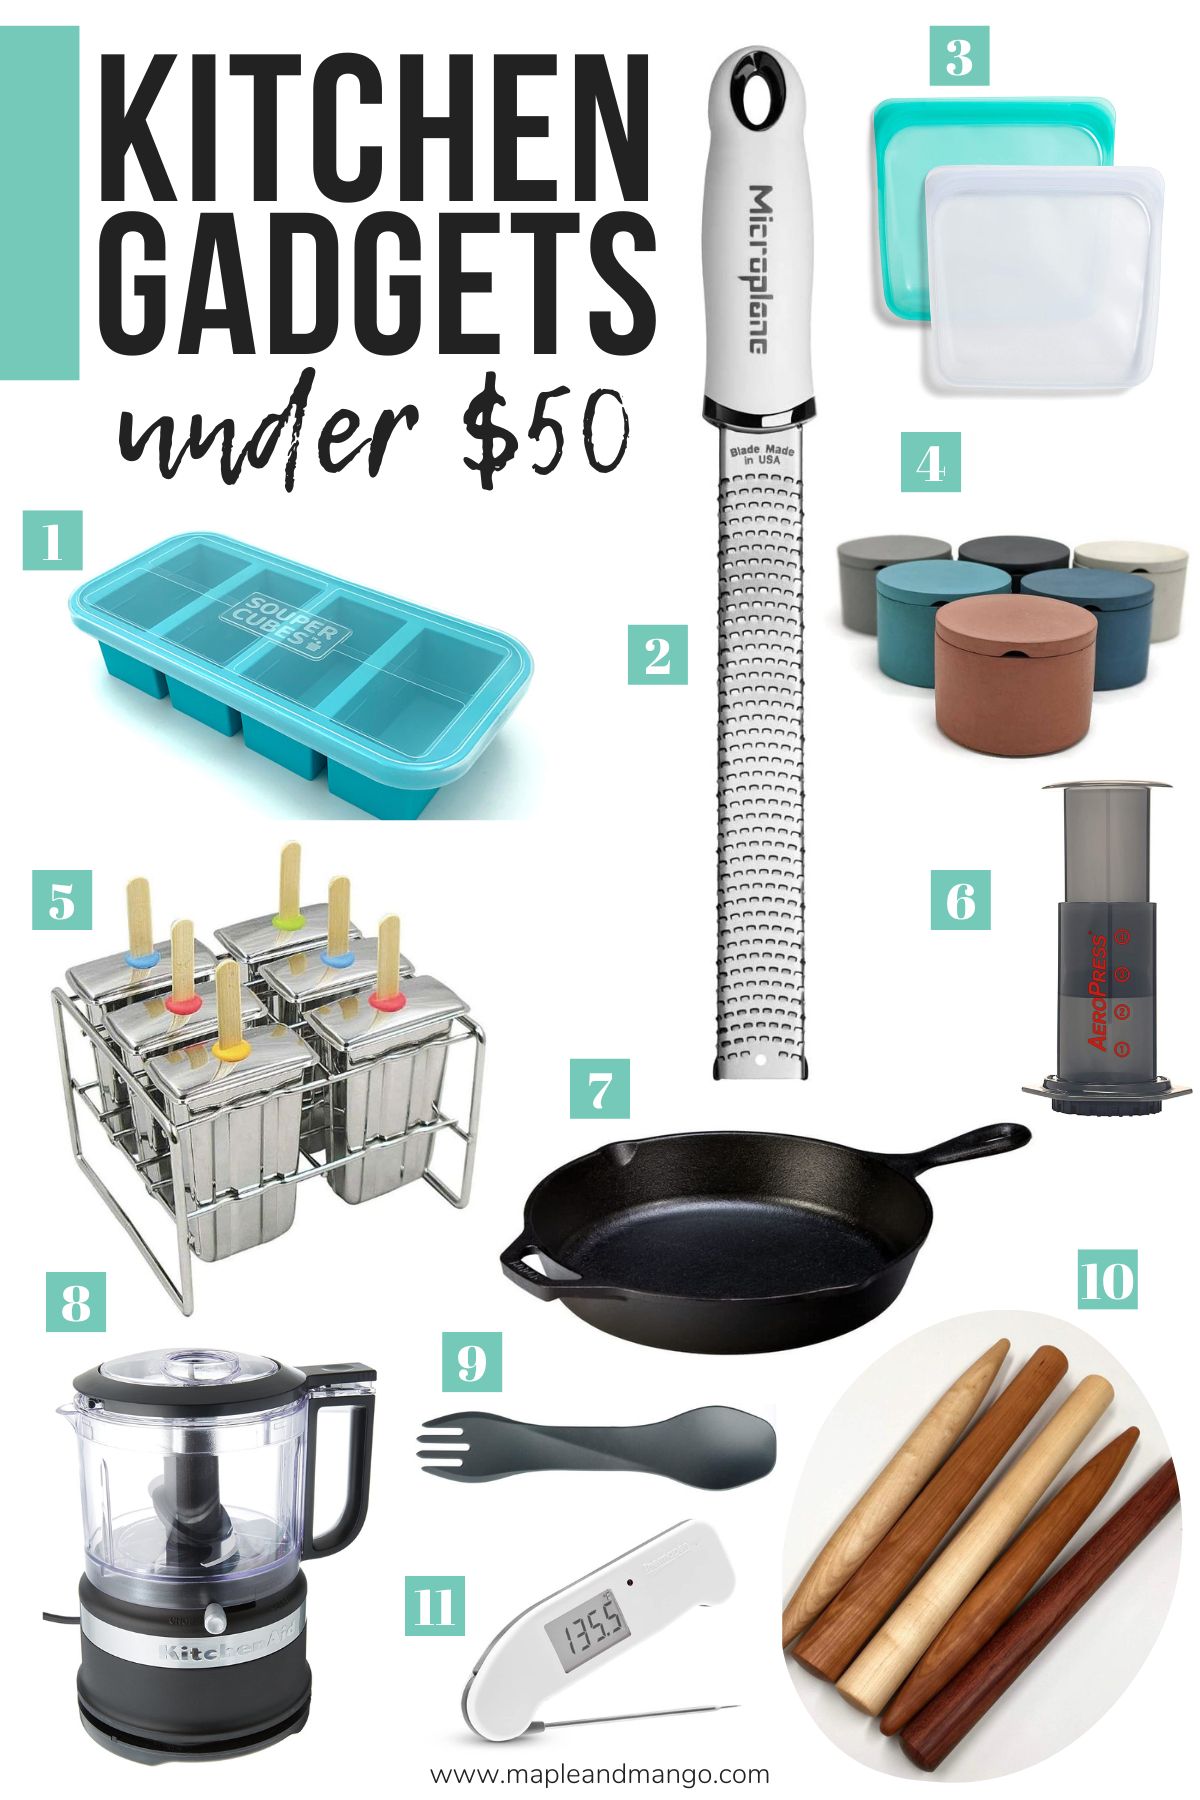 Numbered photo collage of kitchen gadgets under $50.